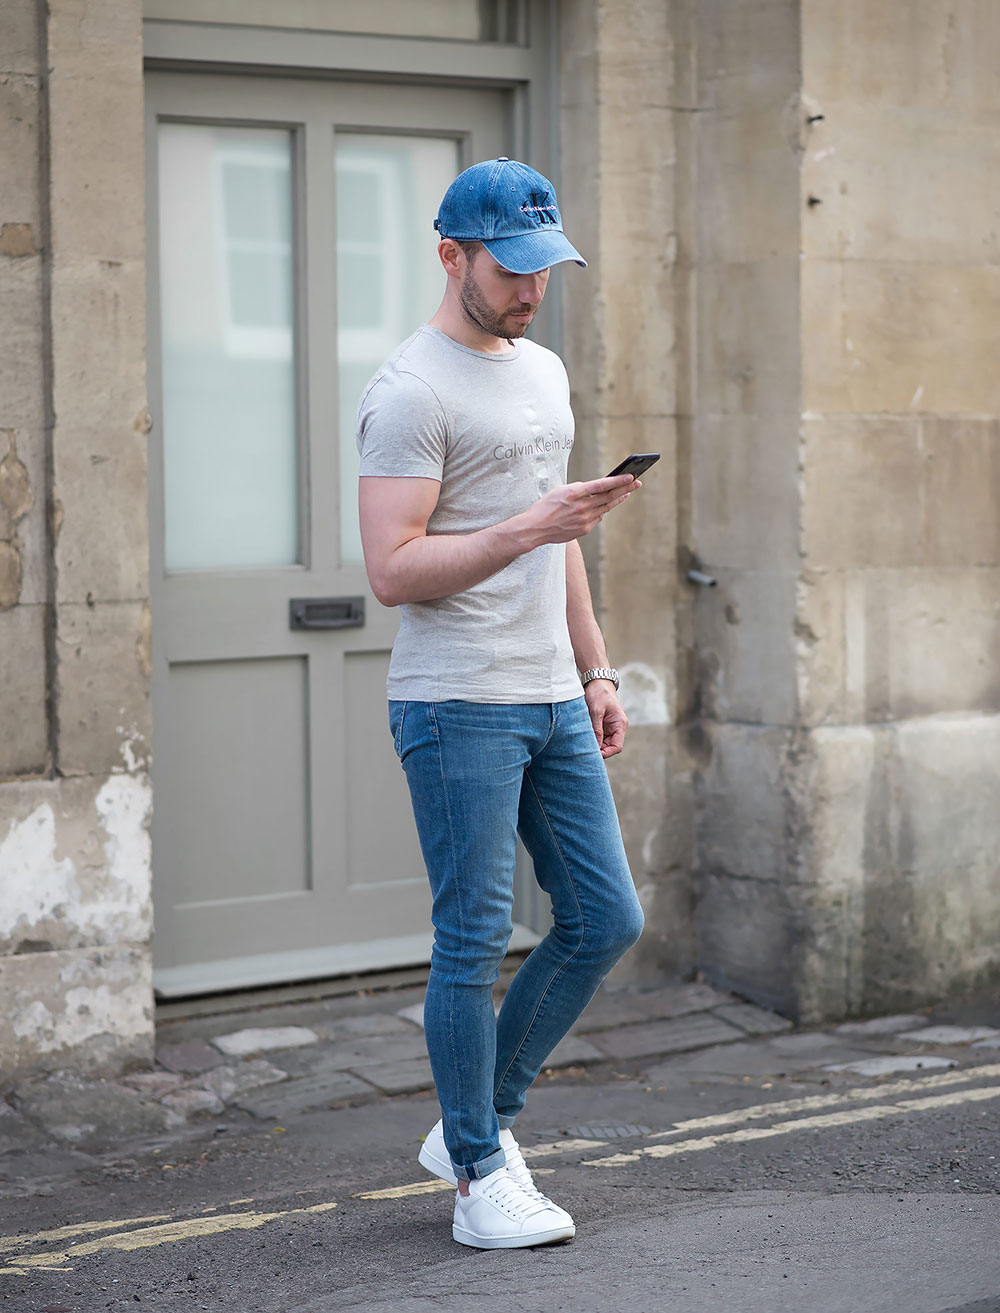 A skinny jeans outfit worn by a regular guy